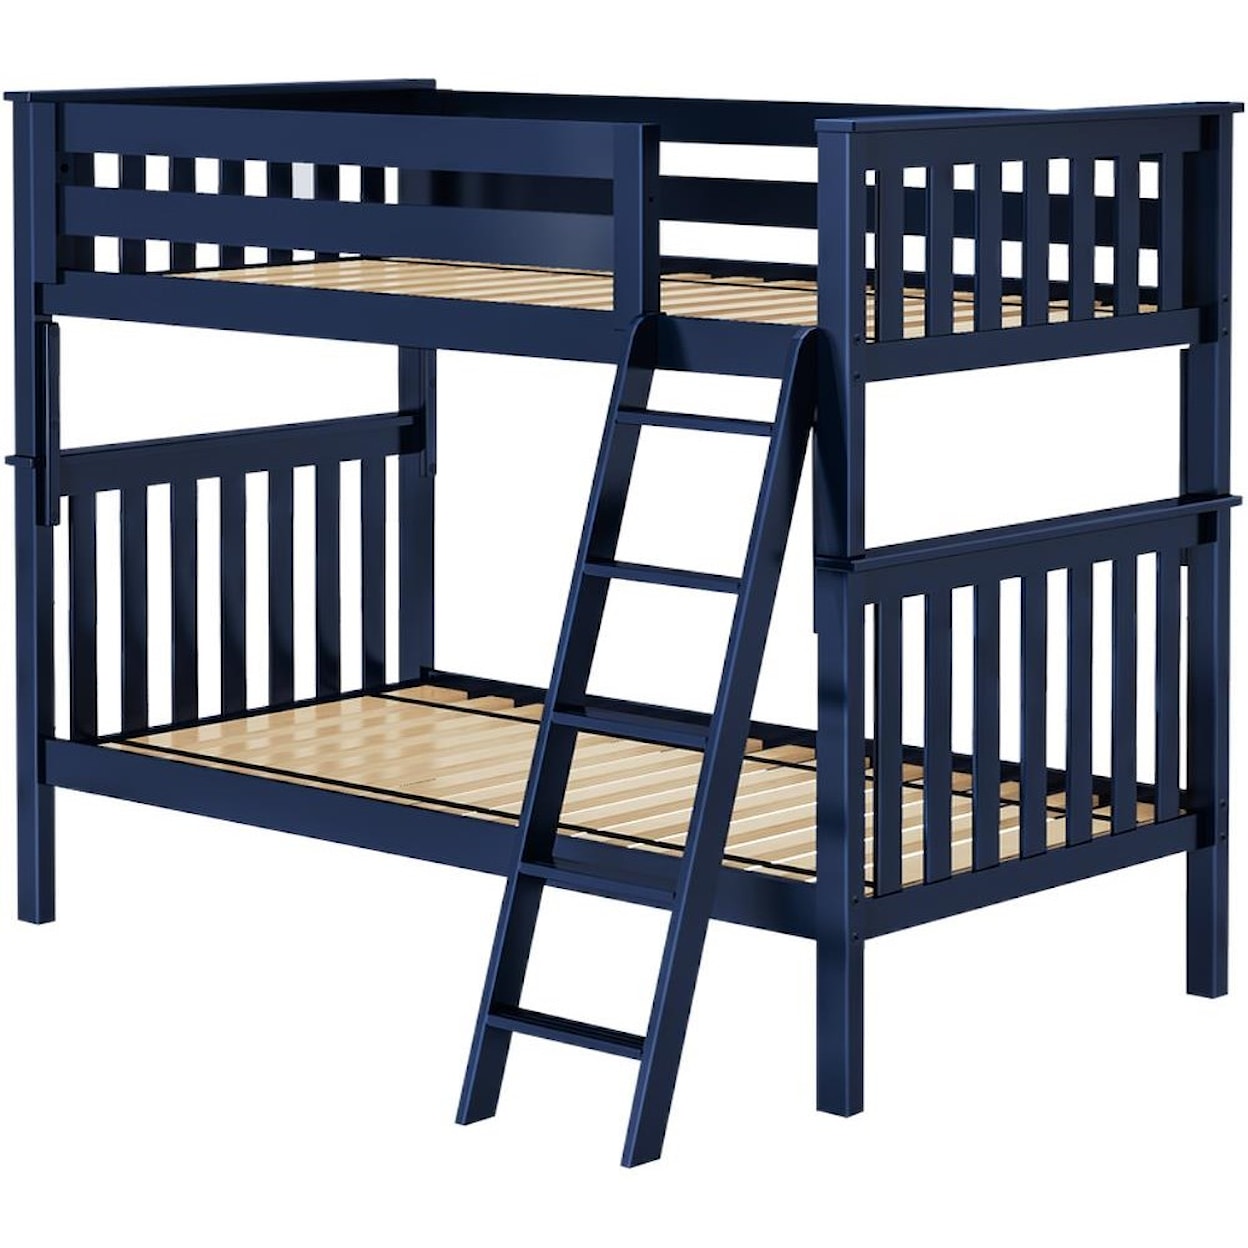 Jackpot Kids Bunk Beds  Bristol 1 Twin/Twin Bunk Bed in Blue